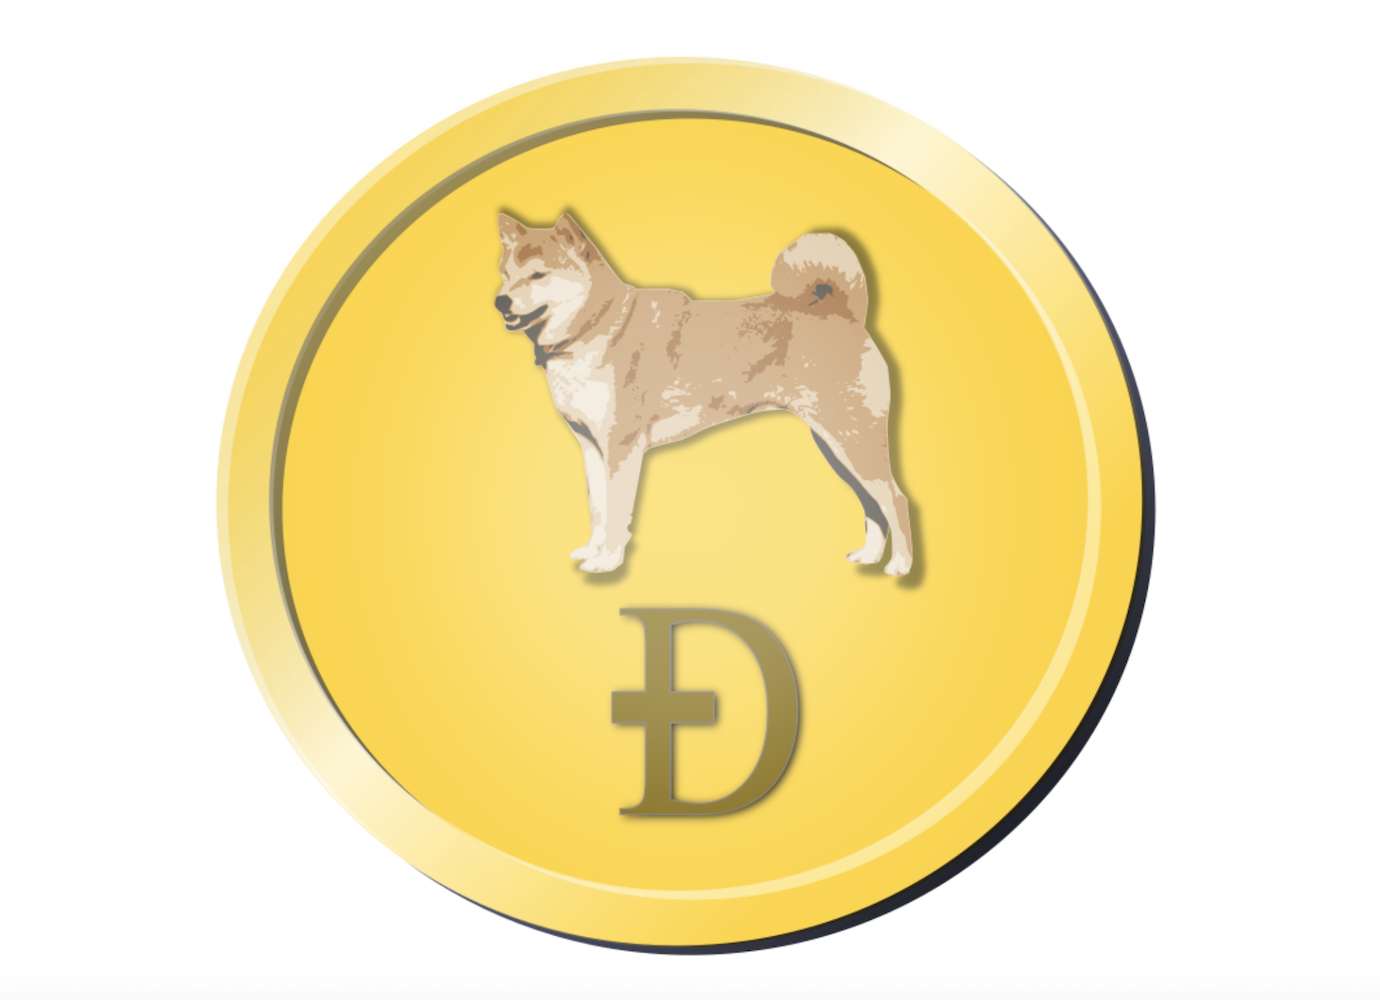 Latvian airline airBaltic now takes payments in Dogecoin